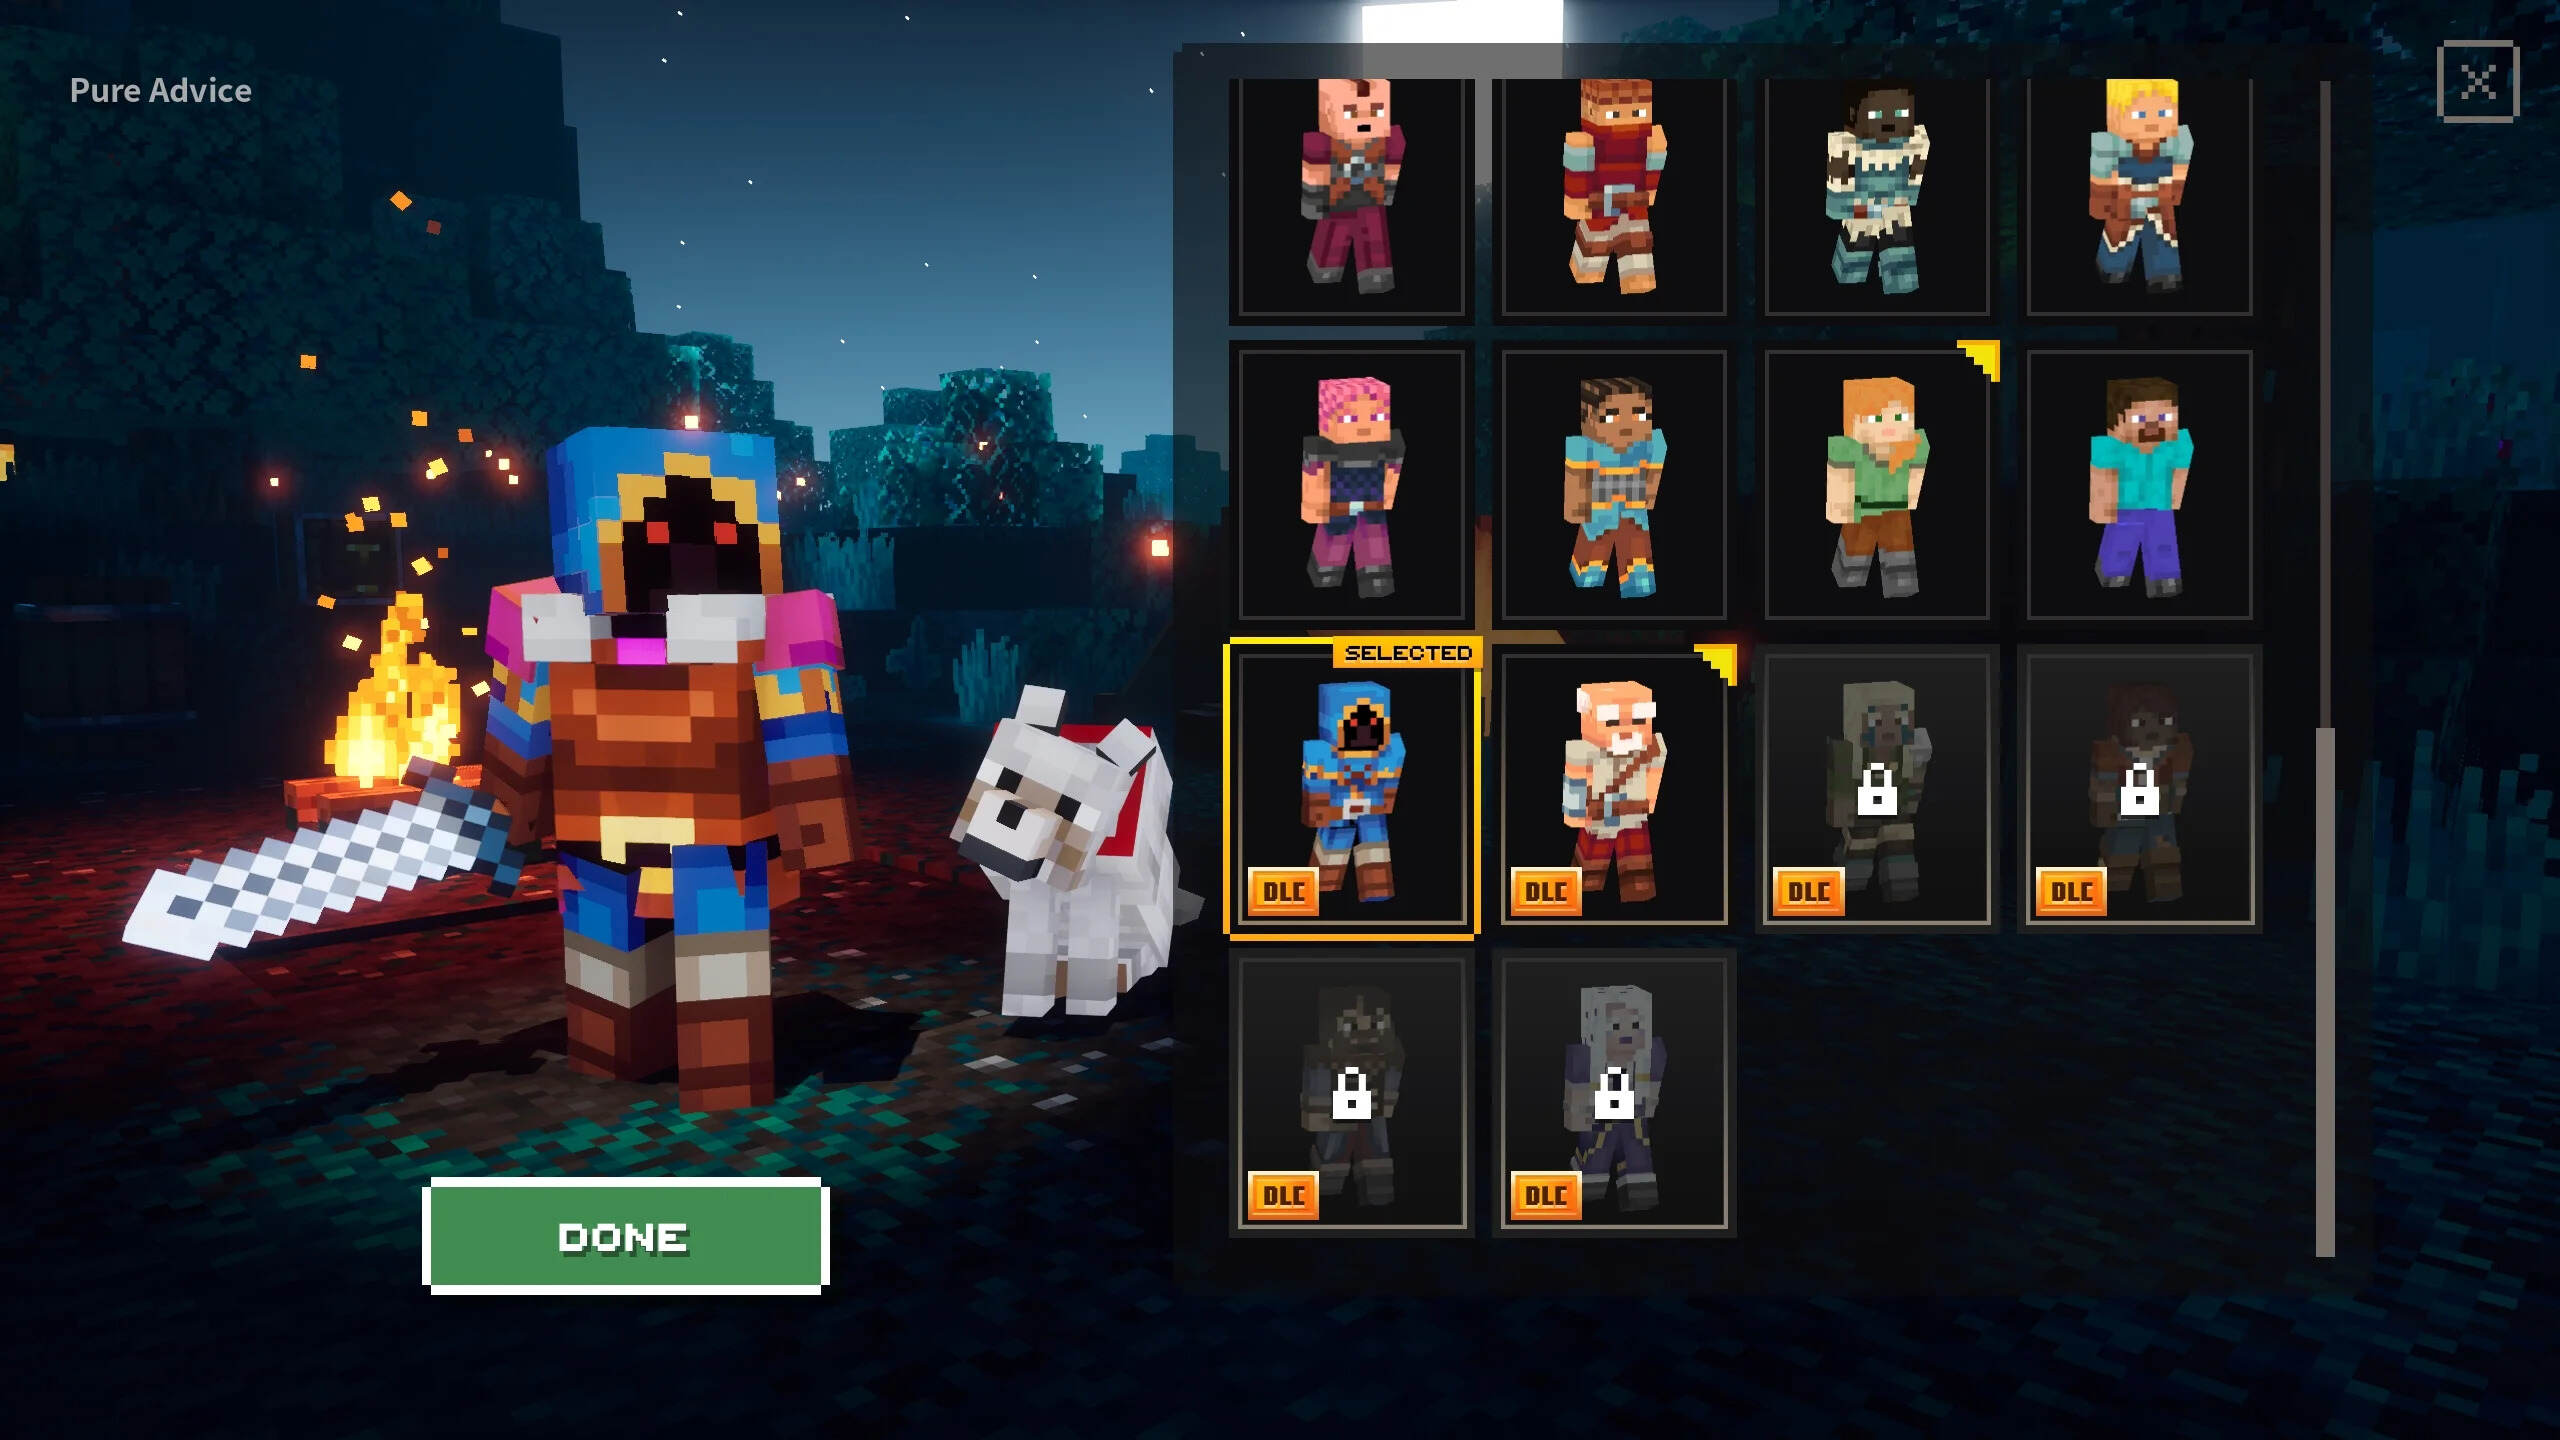 How To Download Minecraft Skins On Nintendo Switch